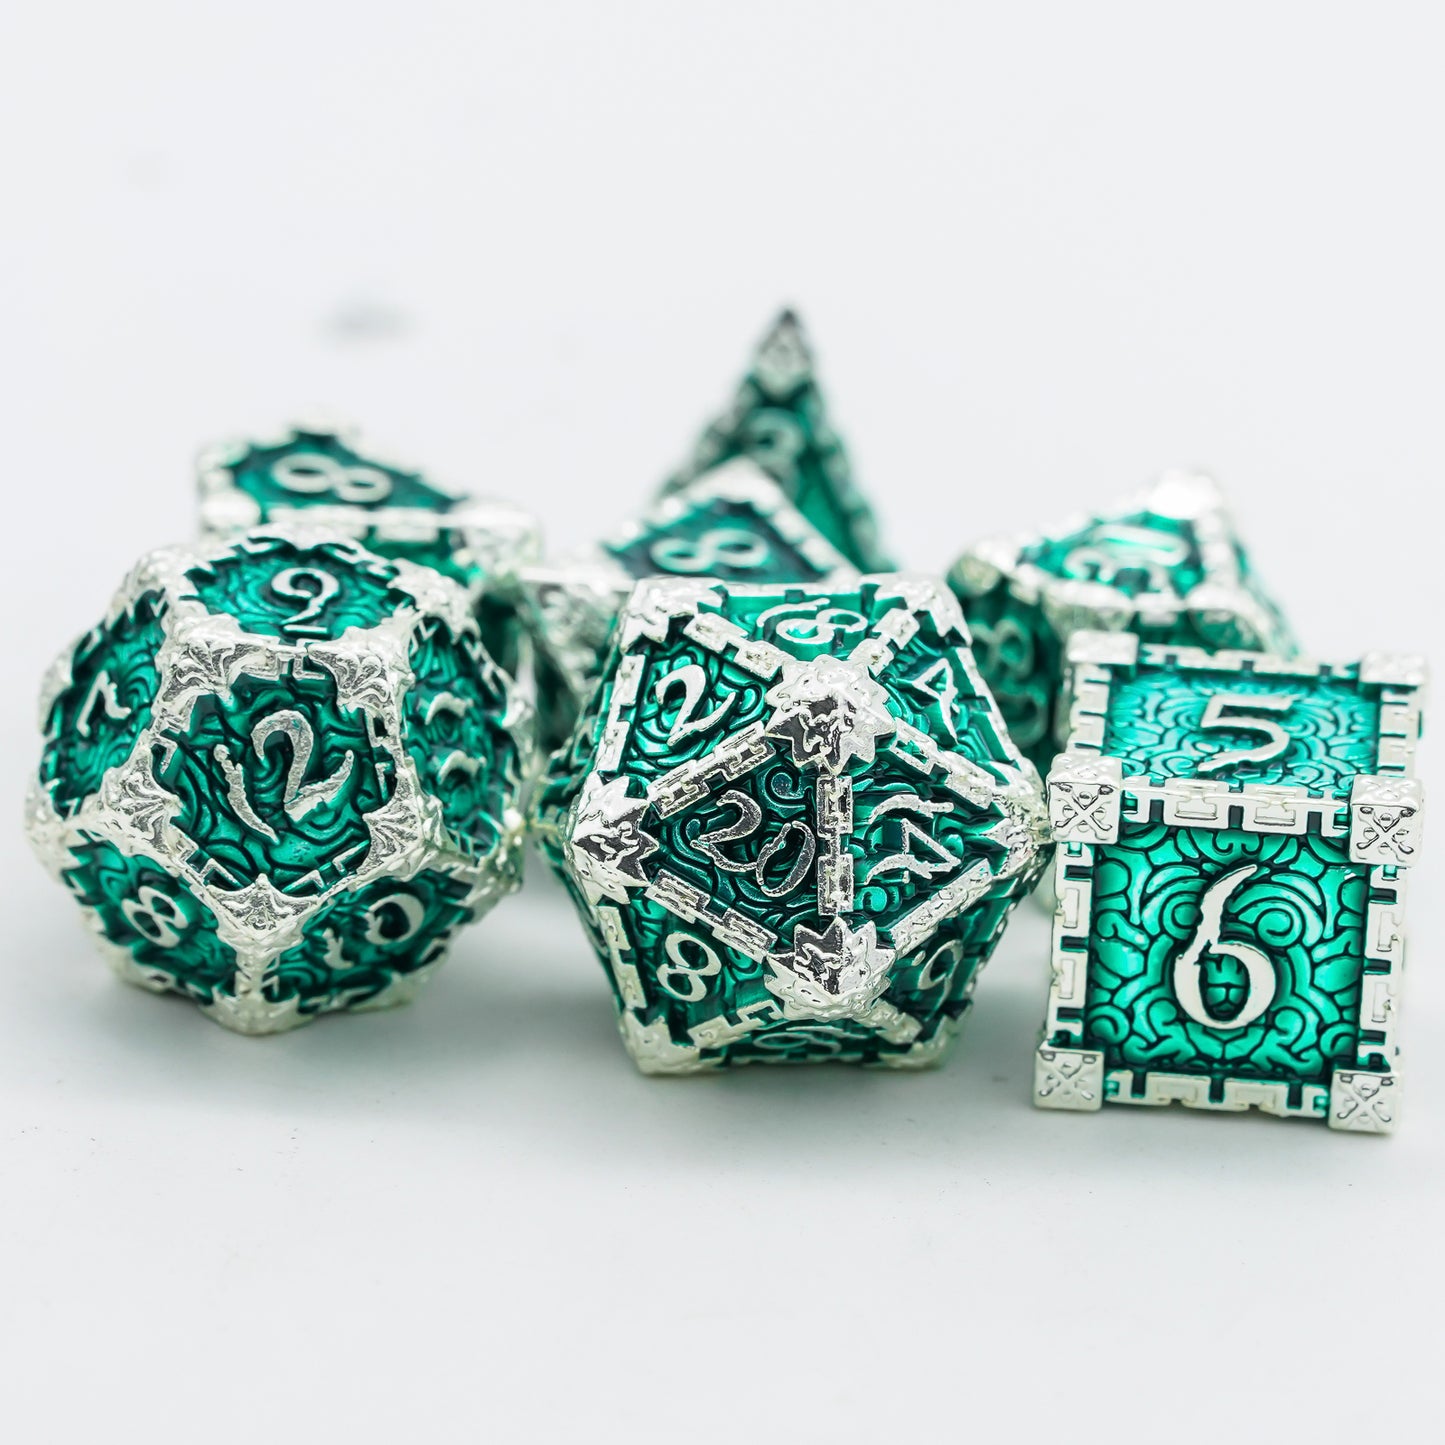 d12, d20 and d6 emerald blade dice